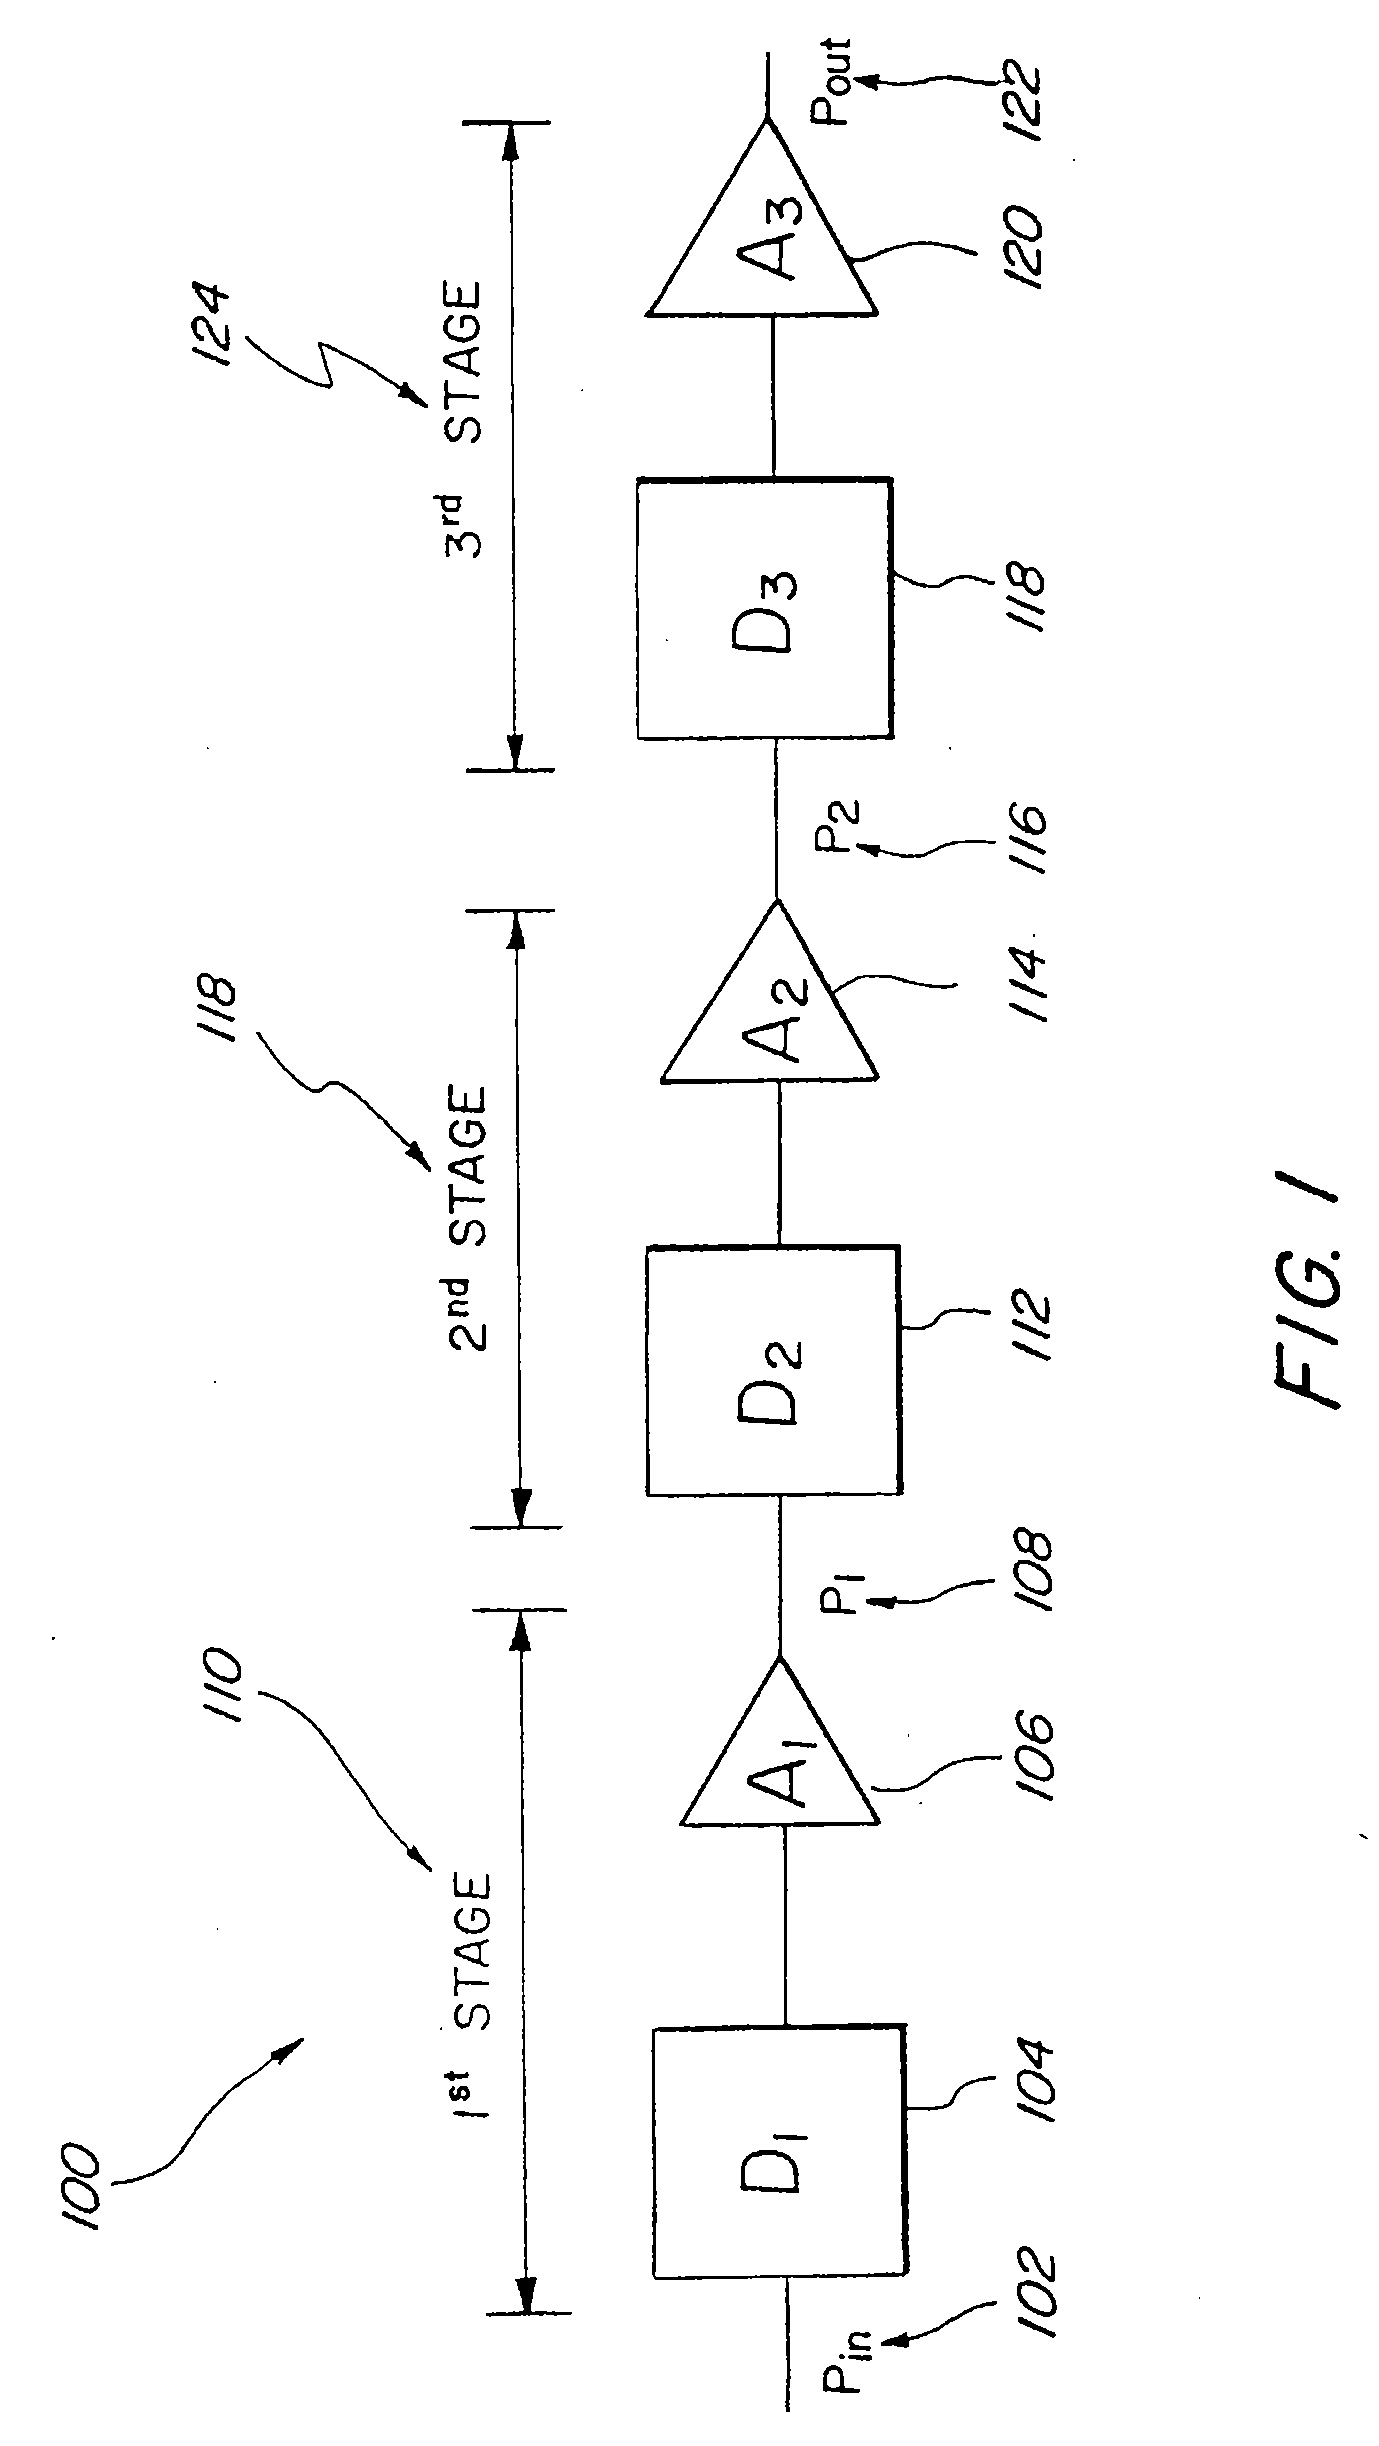 Power efficient multistage amplifier and design method